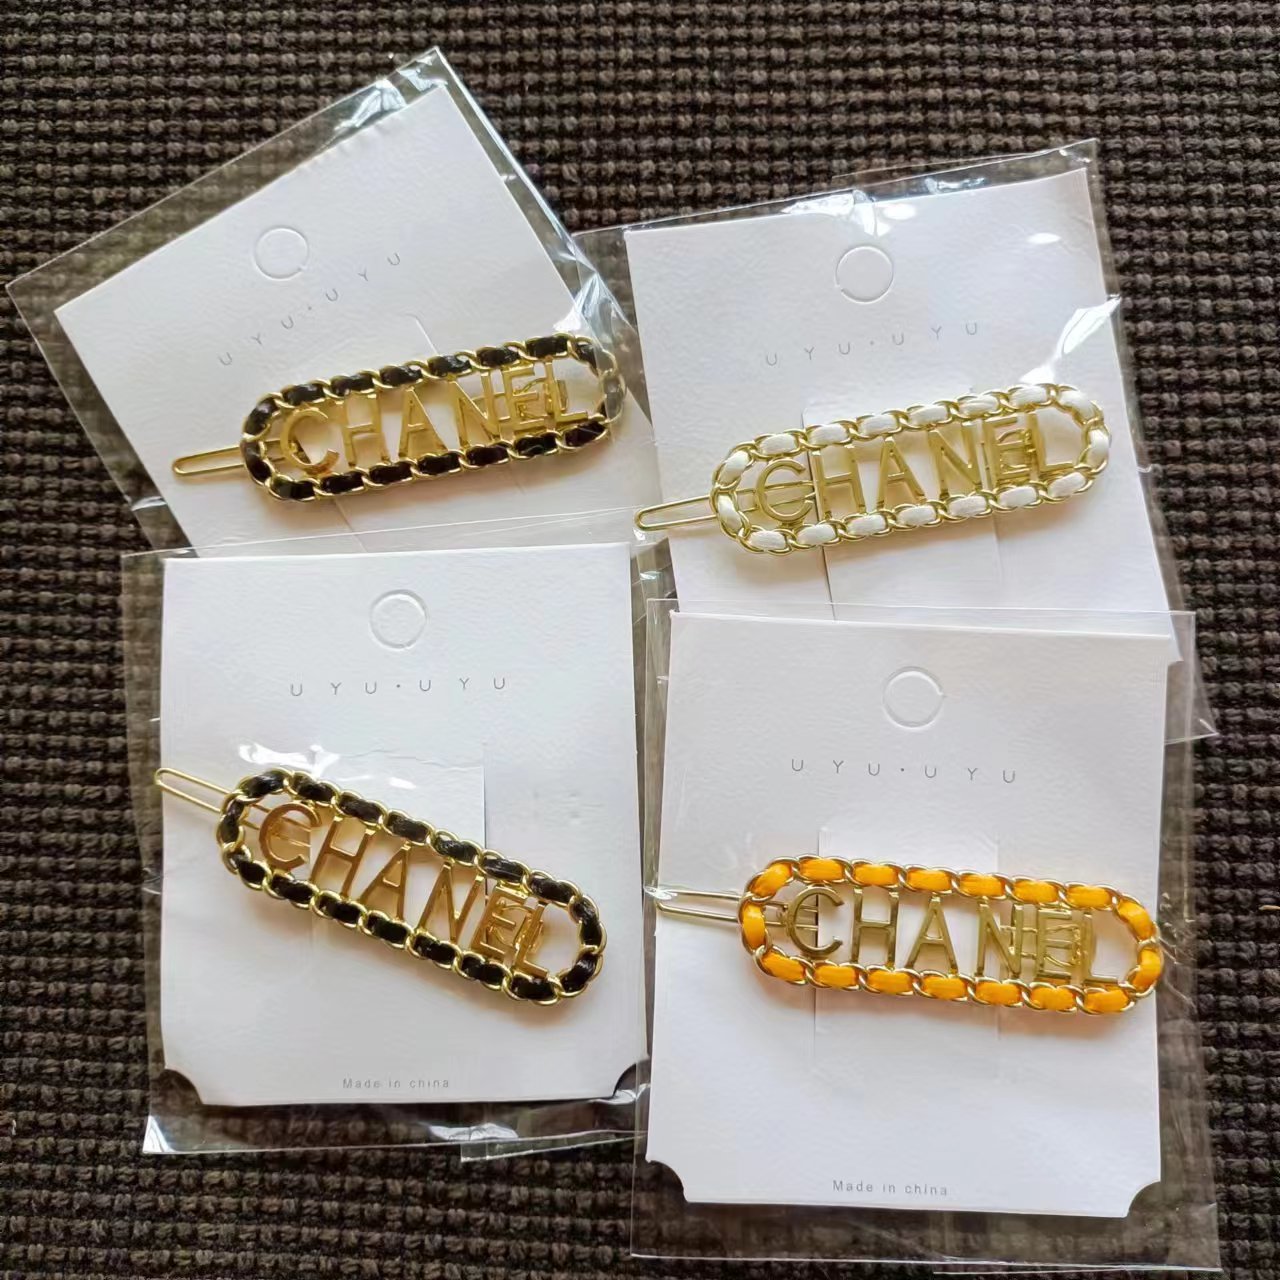 Big sale! New Chanel leather hairclip